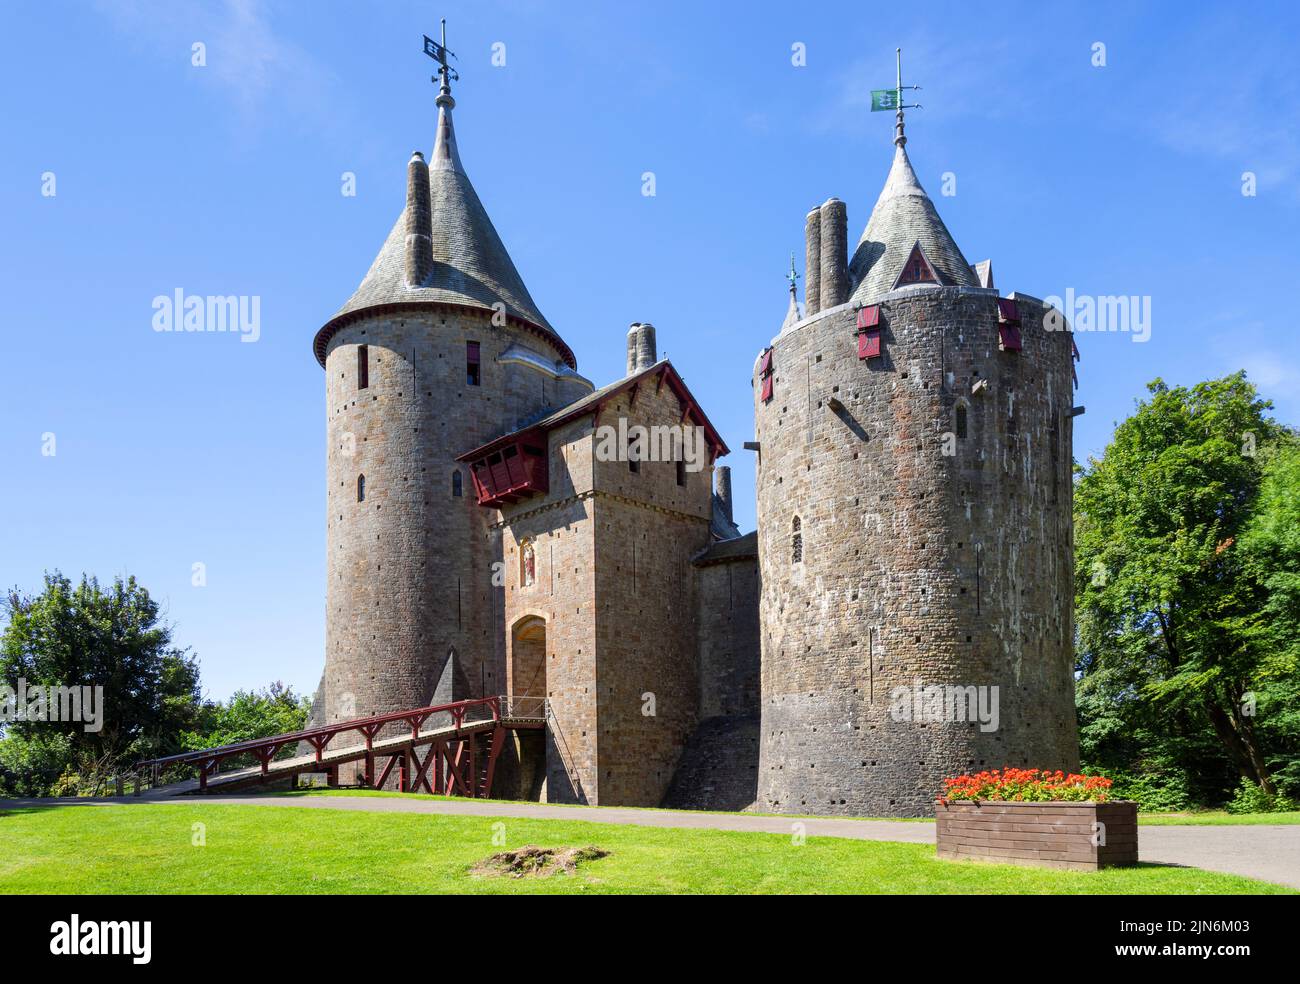 Castell Coch Castle Coch or Red Castle Tongwynlais Cardiff South Wales UK GB Europe Stock Photo